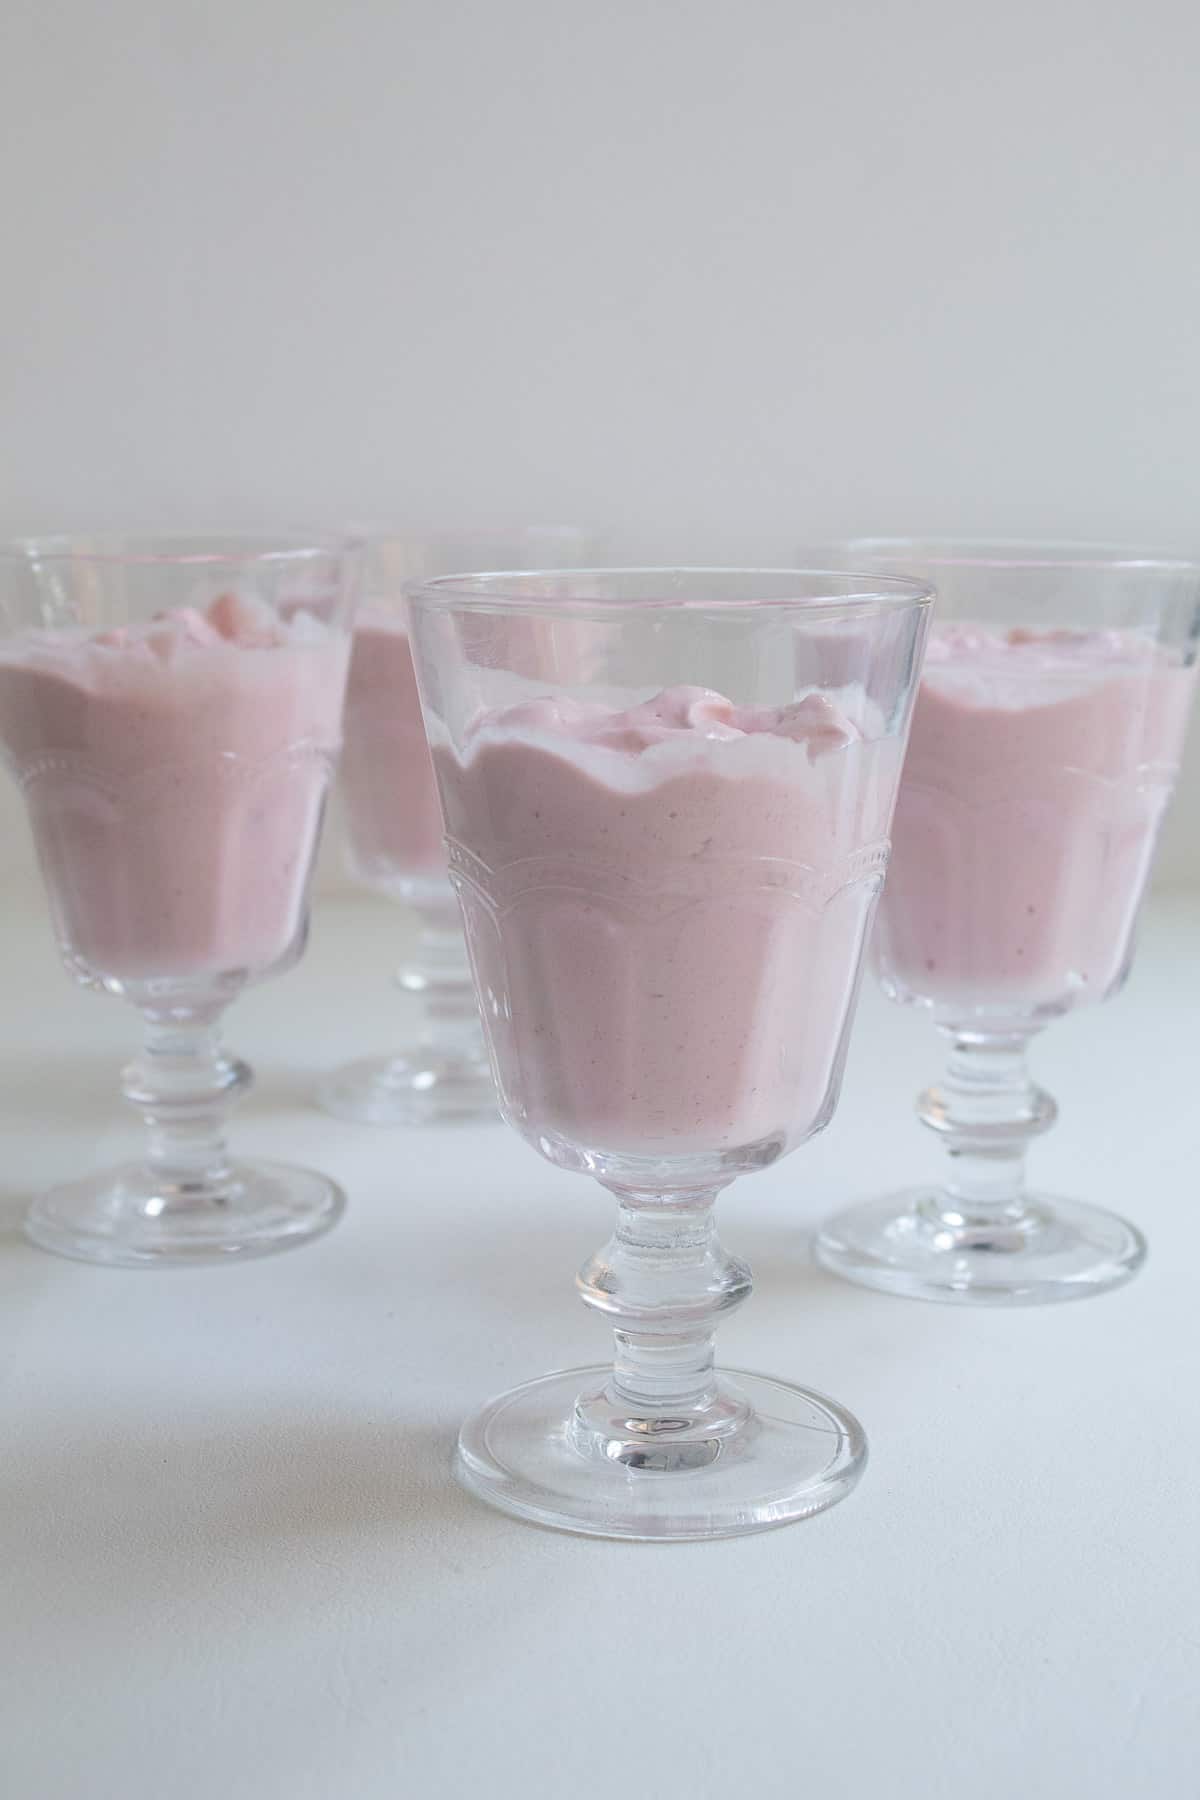 The strawberry mousse is divided among four footed serving glasses sitting on a white surface.